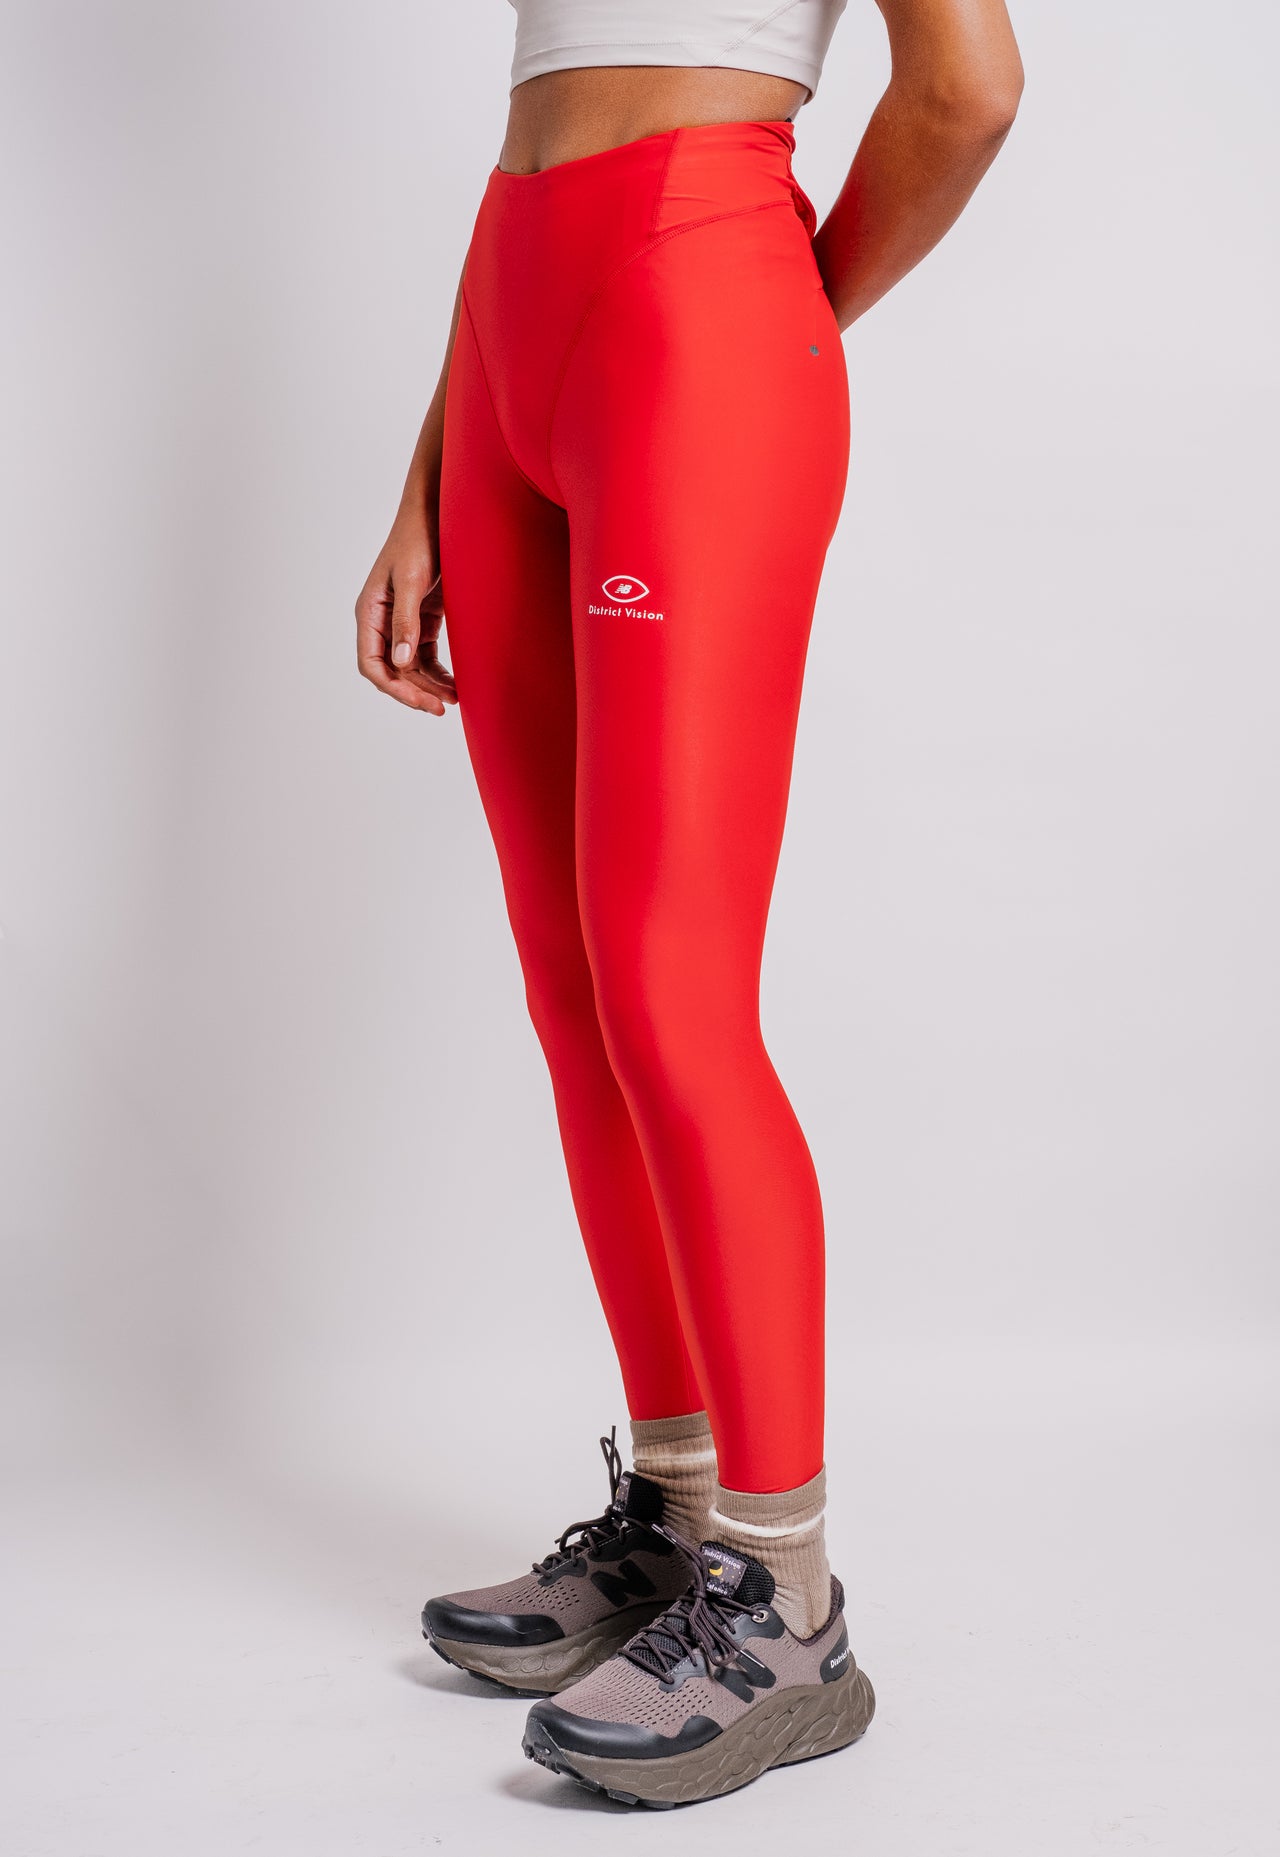 DV + NB Pocketed Long Tights in Goji Red